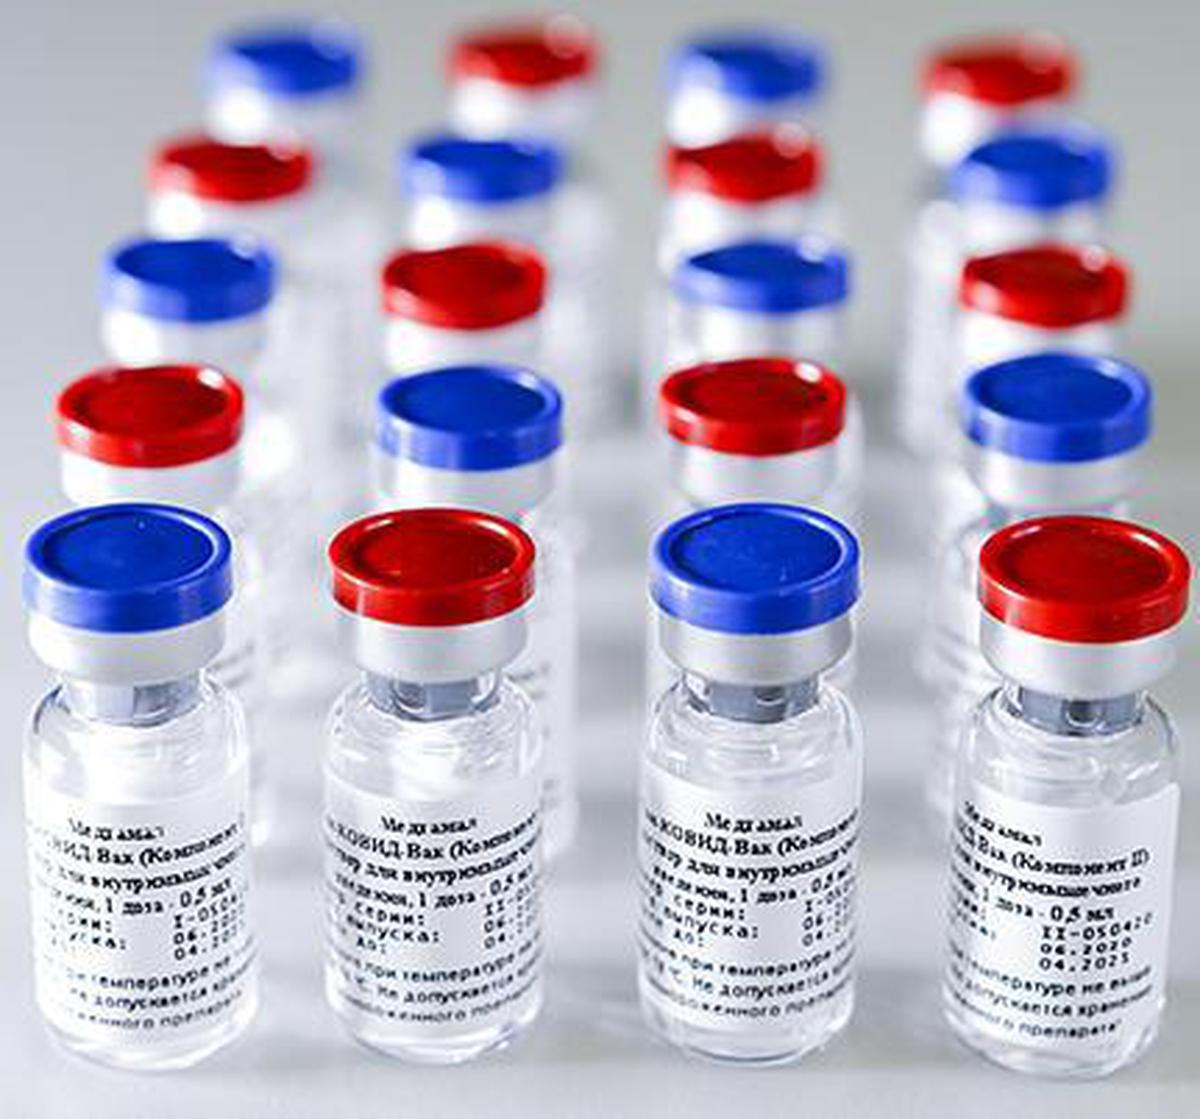 Sputnik V, the vaccine for COVID-19 developed by Russia